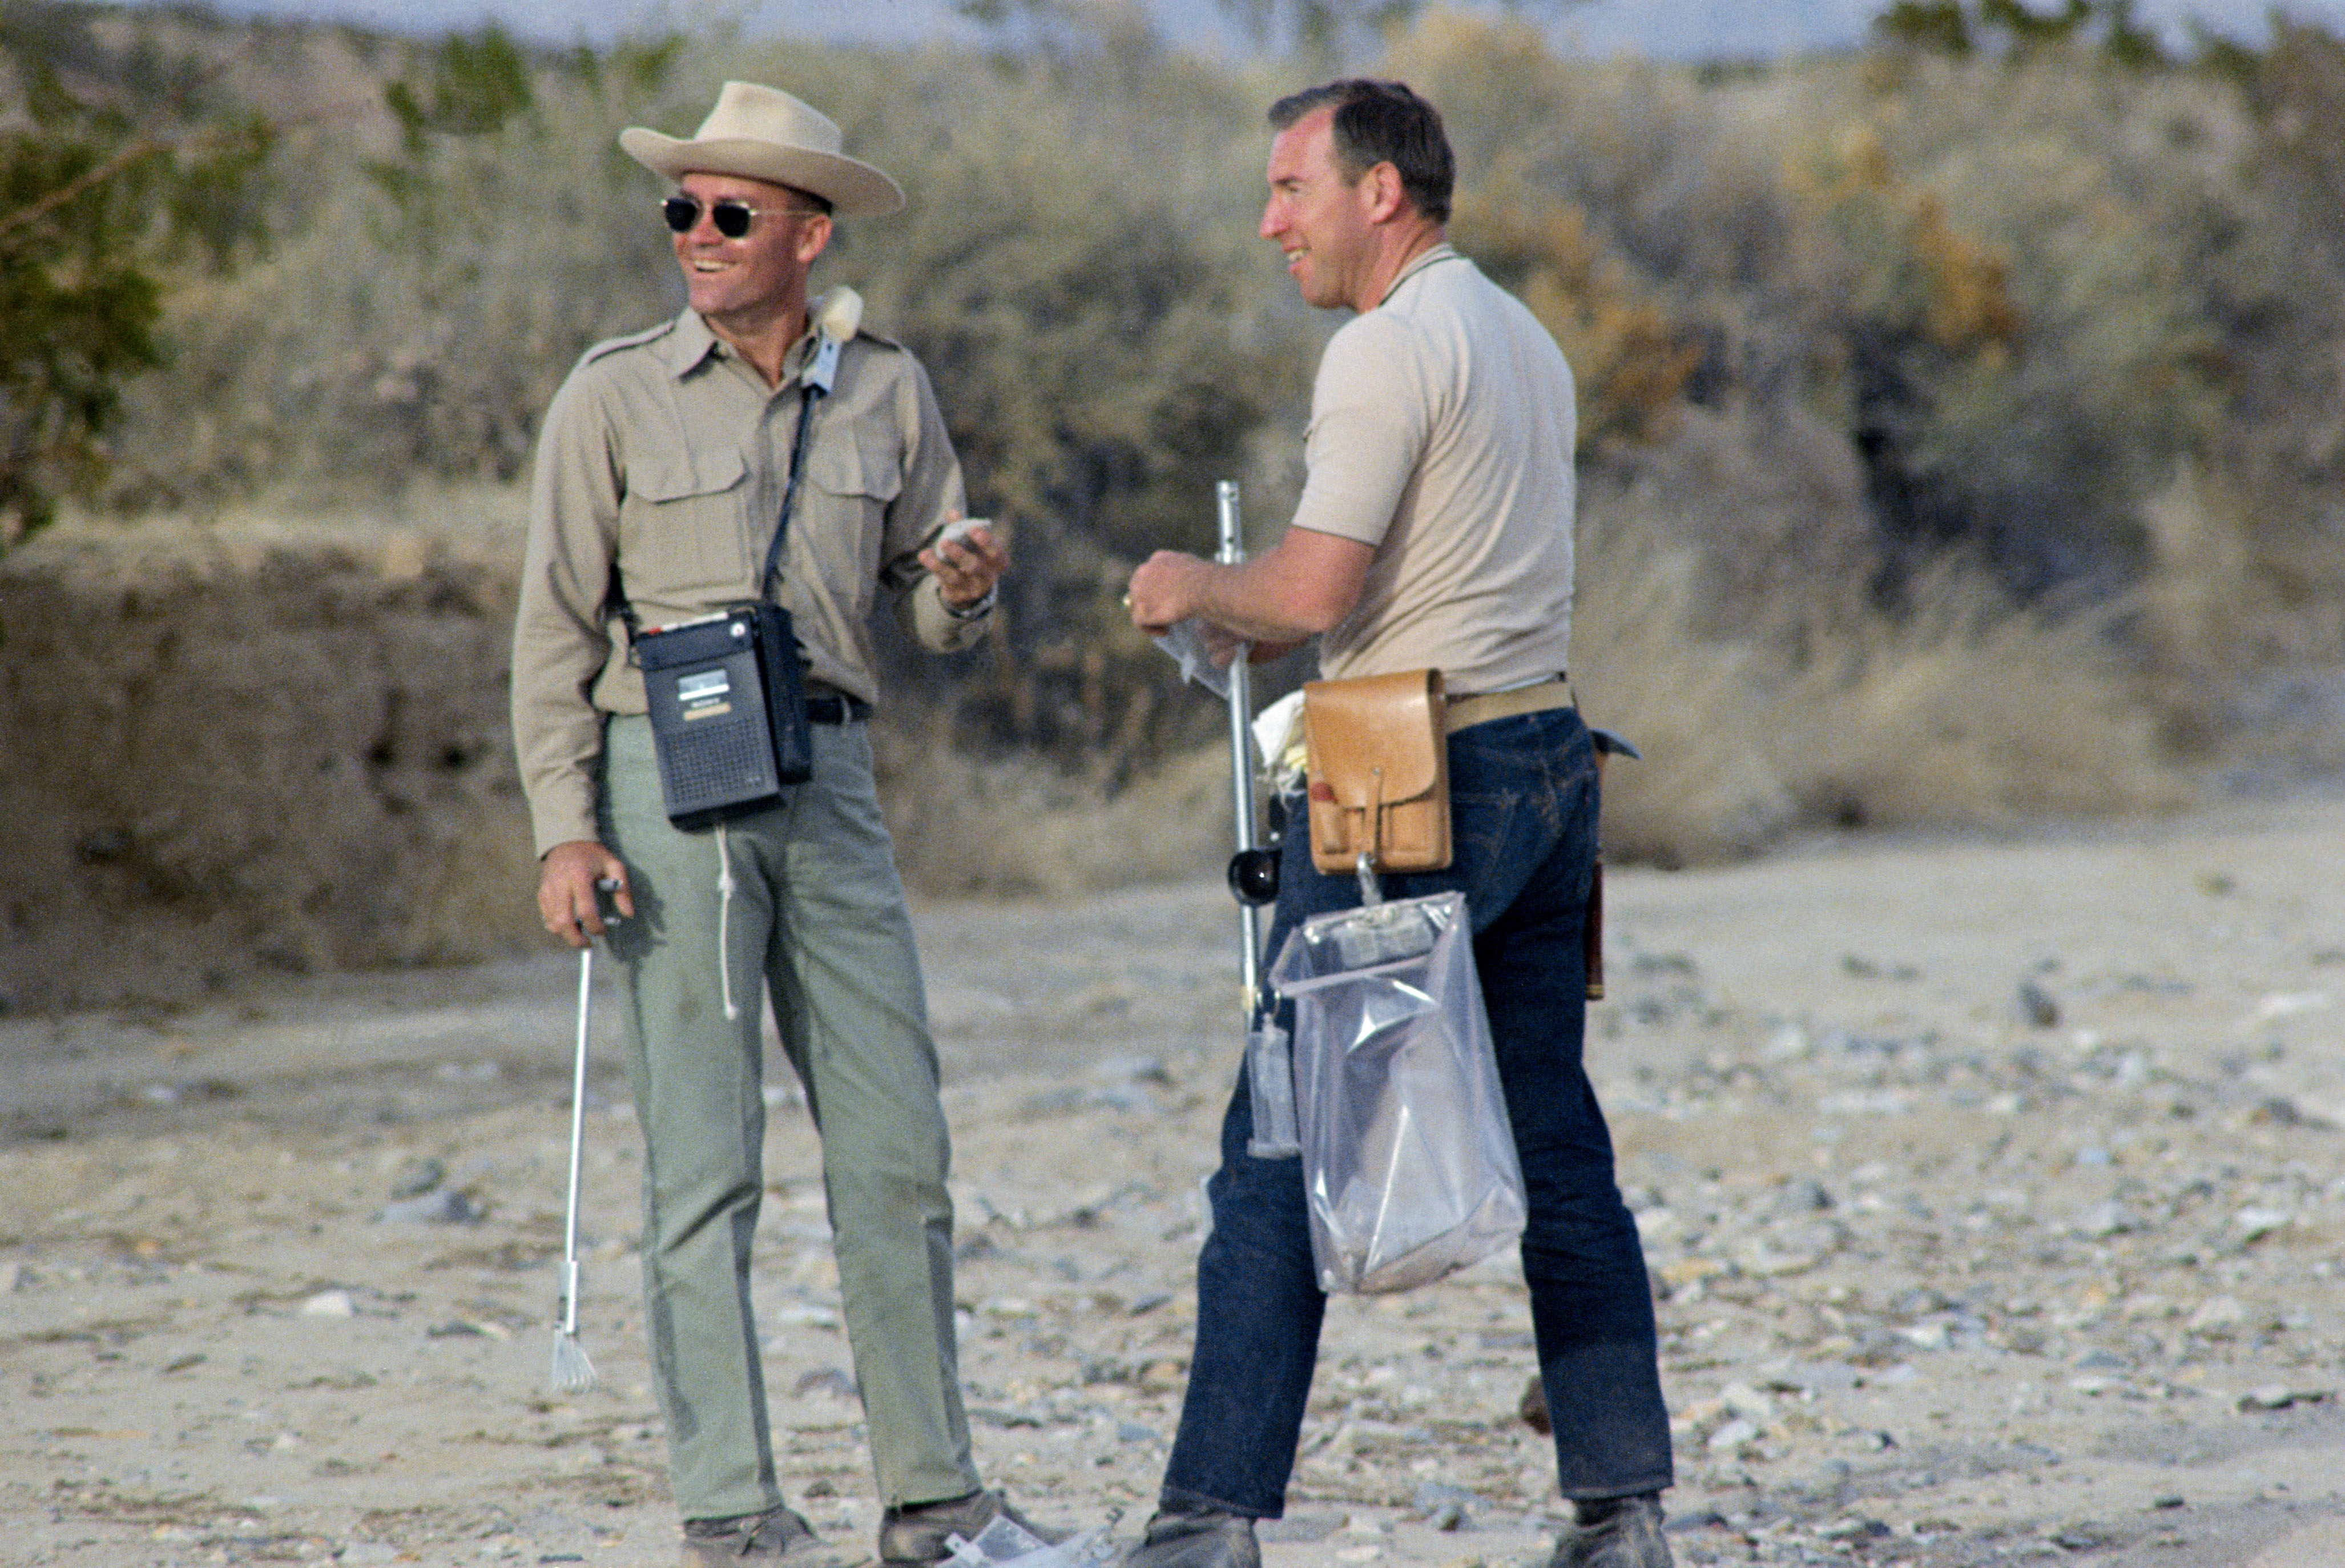 Apollo 11 backup astronauts Fred W. Haise, left, and James A. Lovell at the Sierra Blanco geology training session